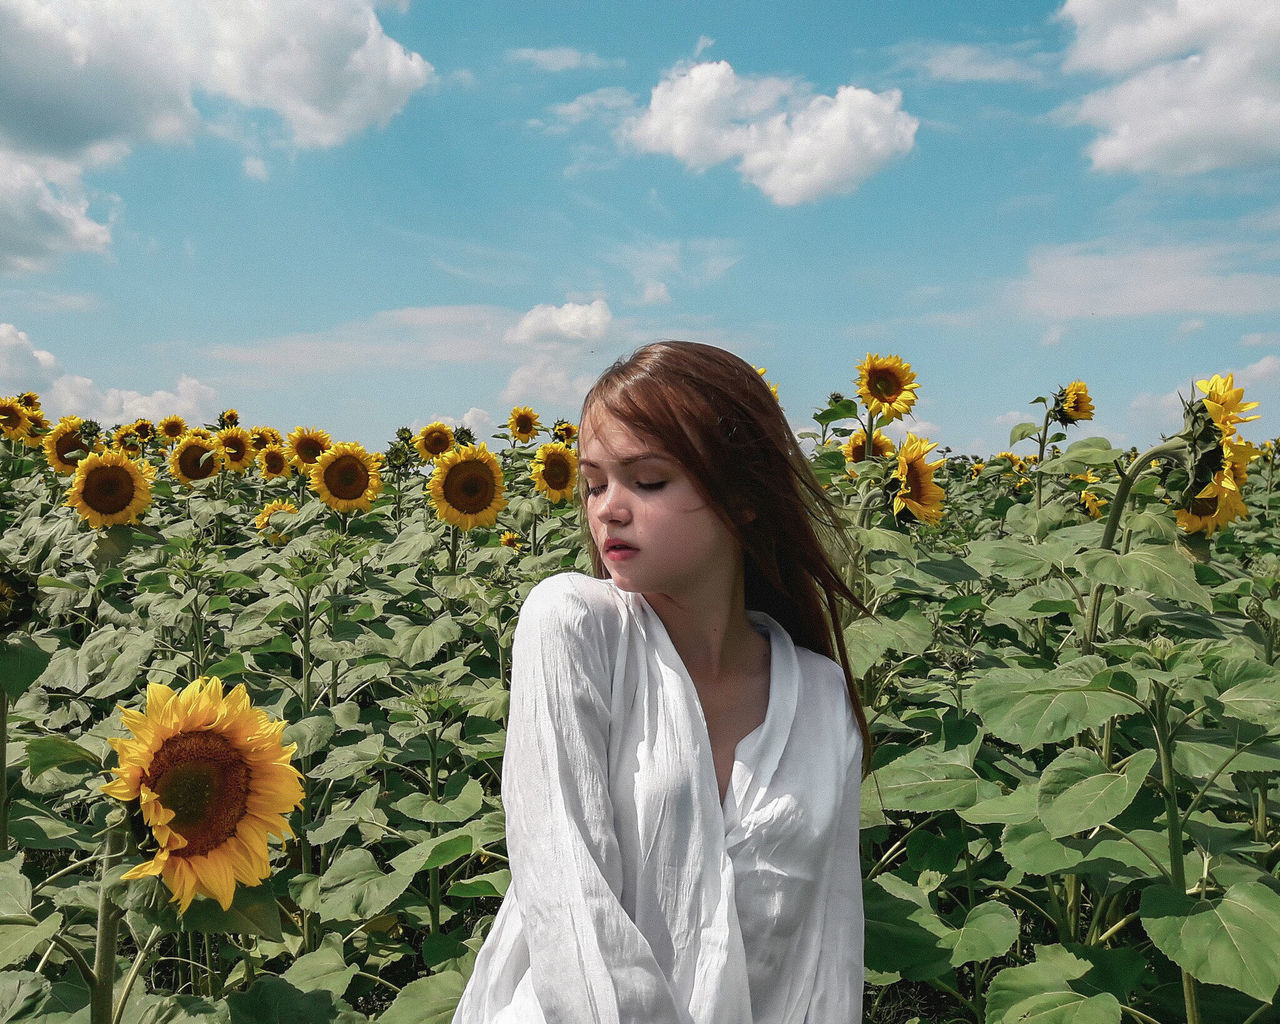 one person, plant, flower, flowering plant, lifestyles, real people, leisure activity, cloud - sky, beauty in nature, growth, nature, sky, freshness, young women, young adult, waist up, women, standing, vulnerability, hair, hairstyle, yellow, flower head, sunflower, outdoors, beautiful woman